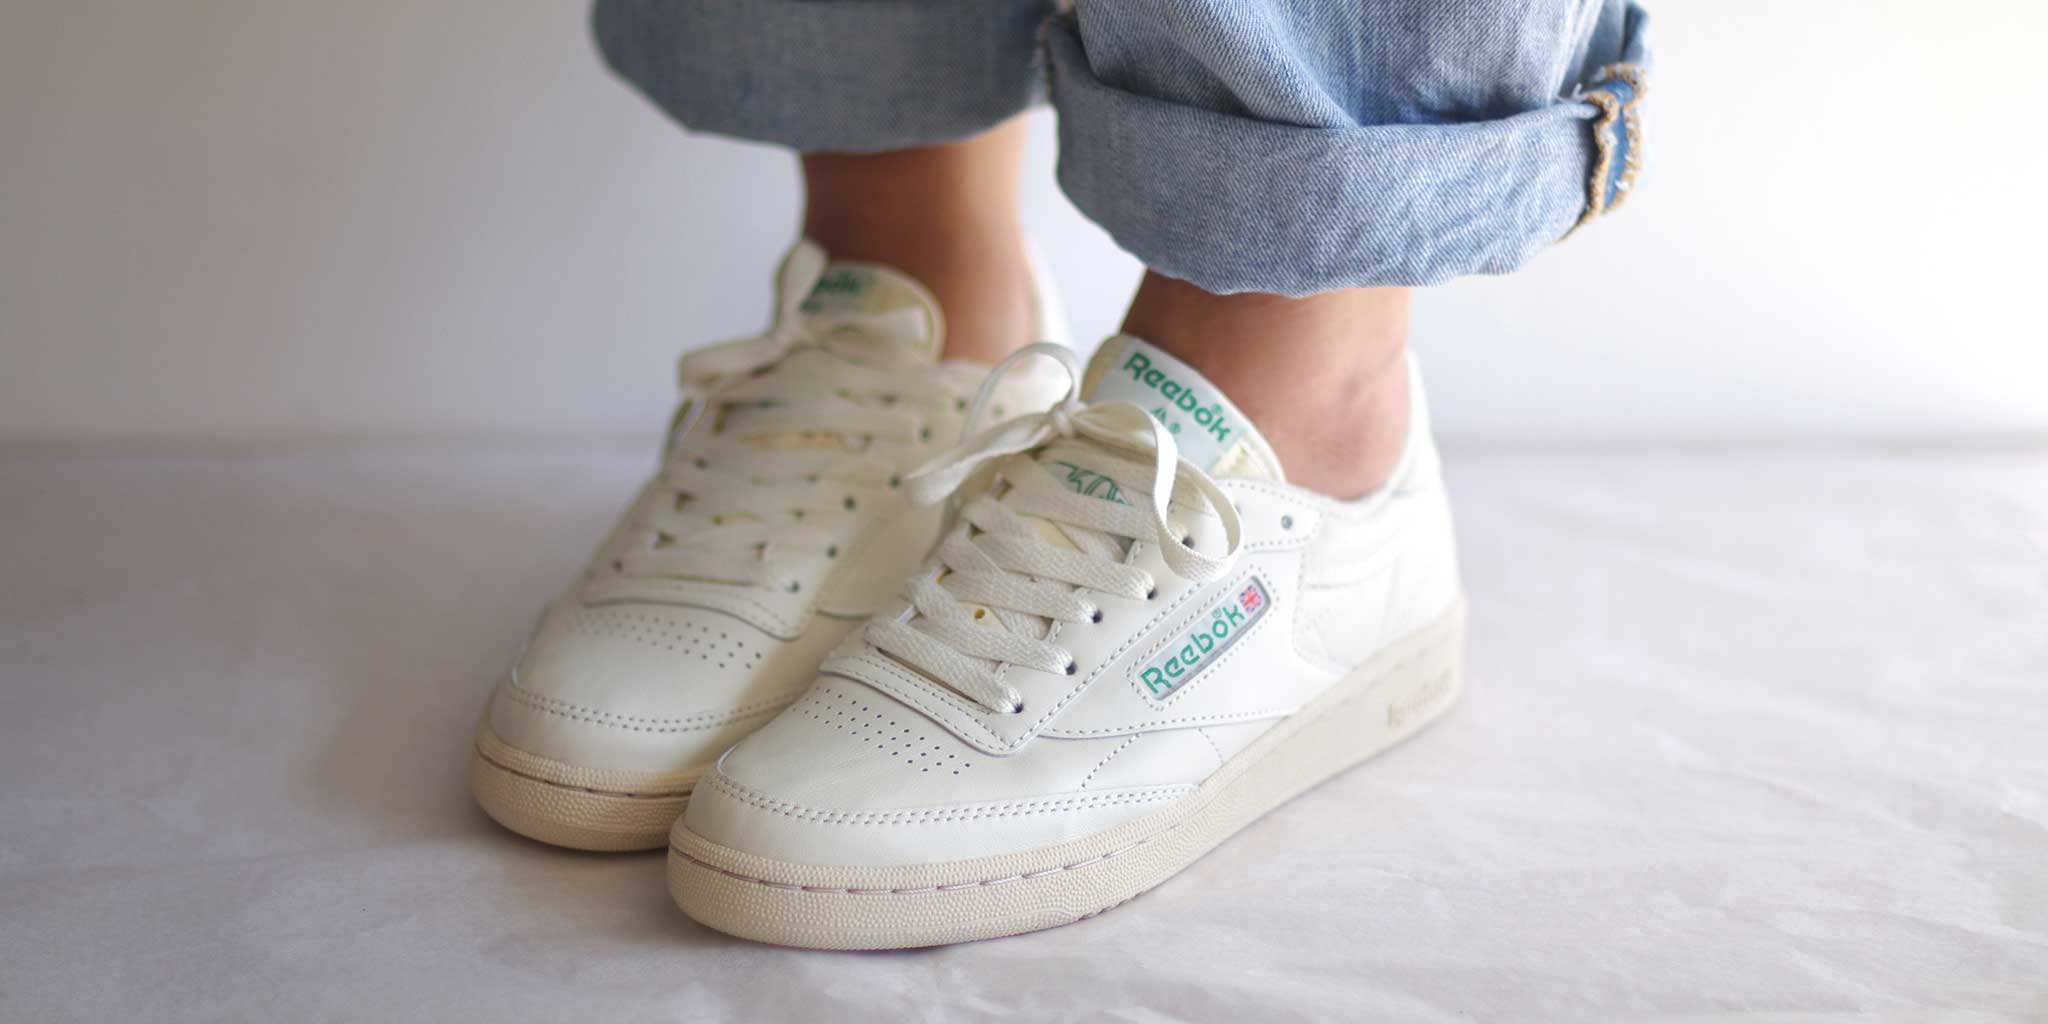 difference between reebok club c and club c 85